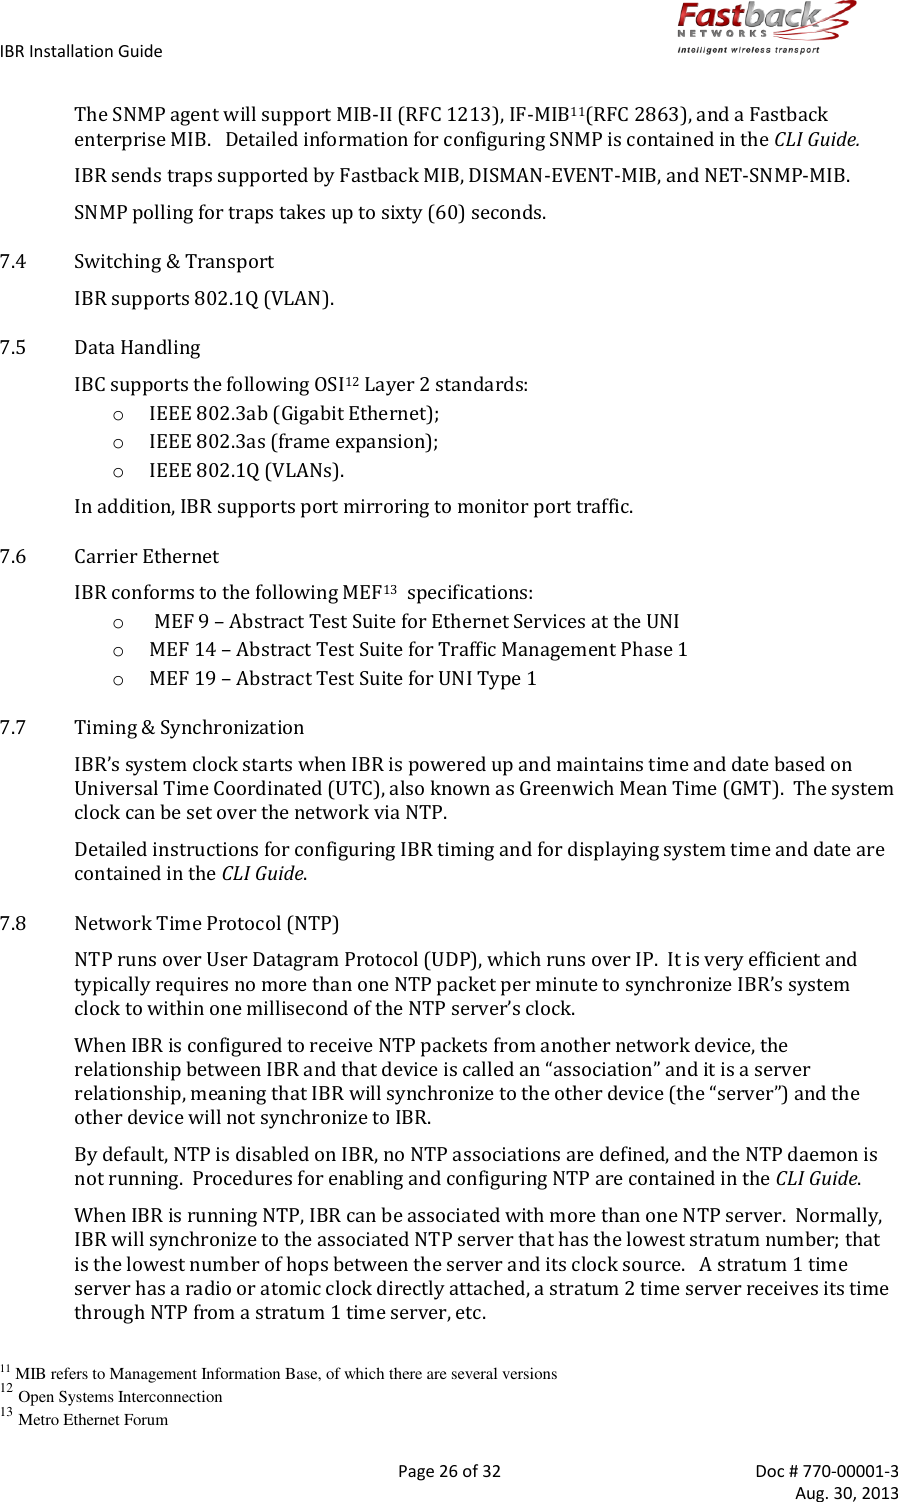 IBR Installation Guide        Page 26 of 32  Doc # 770-00001-3     Aug. 30, 2013   The SNMP agent will support MIB-II (RFC 1213), IF-MIB11(RFC 2863), and a Fastback enterprise MIB.   Detailed information for configuring SNMP is contained in the CLI Guide. IBR sends traps supported by Fastback MIB, DISMAN-EVENT-MIB, and NET-SNMP-MIB. SNMP polling for traps takes up to sixty (60) seconds. 7.4 Switching &amp; Transport IBR supports 802.1Q (VLAN). 7.5 Data Handling IBC supports the following OSI12 Layer 2 standards: o IEEE 802.3ab (Gigabit Ethernet); o IEEE 802.3as (frame expansion); o IEEE 802.1Q (VLANs). In addition, IBR supports port mirroring to monitor port traffic. 7.6 Carrier Ethernet IBR conforms to the following MEF13  specifications: o  MEF 9 – Abstract Test Suite for Ethernet Services at the UNI o MEF 14 – Abstract Test Suite for Traffic Management Phase 1 o MEF 19 – Abstract Test Suite for UNI Type 1 7.7 Timing &amp; Synchronization IBR’s system clock starts when IBR is powered up and maintains time and date based on Universal Time Coordinated (UTC), also known as Greenwich Mean Time (GMT).  The system clock can be set over the network via NTP. Detailed instructions for configuring IBR timing and for displaying system time and date are contained in the CLI Guide. 7.8 Network Time Protocol (NTP) NTP runs over User Datagram Protocol (UDP), which runs over IP.  It is very efficient and typically requires no more than one NTP packet per minute to synchronize IBR’s system clock to within one millisecond of the NTP server’s clock. When IBR is configured to receive NTP packets from another network device, the relationship between IBR and that device is called an “association” and it is a server relationship, meaning that IBR will synchronize to the other device (the “server”) and the other device will not synchronize to IBR.  By default, NTP is disabled on IBR, no NTP associations are defined, and the NTP daemon is not running.  Procedures for enabling and configuring NTP are contained in the CLI Guide. When IBR is running NTP, IBR can be associated with more than one NTP server.  Normally, IBR will synchronize to the associated NTP server that has the lowest stratum number; that is the lowest number of hops between the server and its clock source.   A stratum 1 time server has a radio or atomic clock directly attached, a stratum 2 time server receives its time through NTP from a stratum 1 time server, etc.  11 MIB refers to Management Information Base, of which there are several versions 12 Open Systems Interconnection 13 Metro Ethernet Forum 